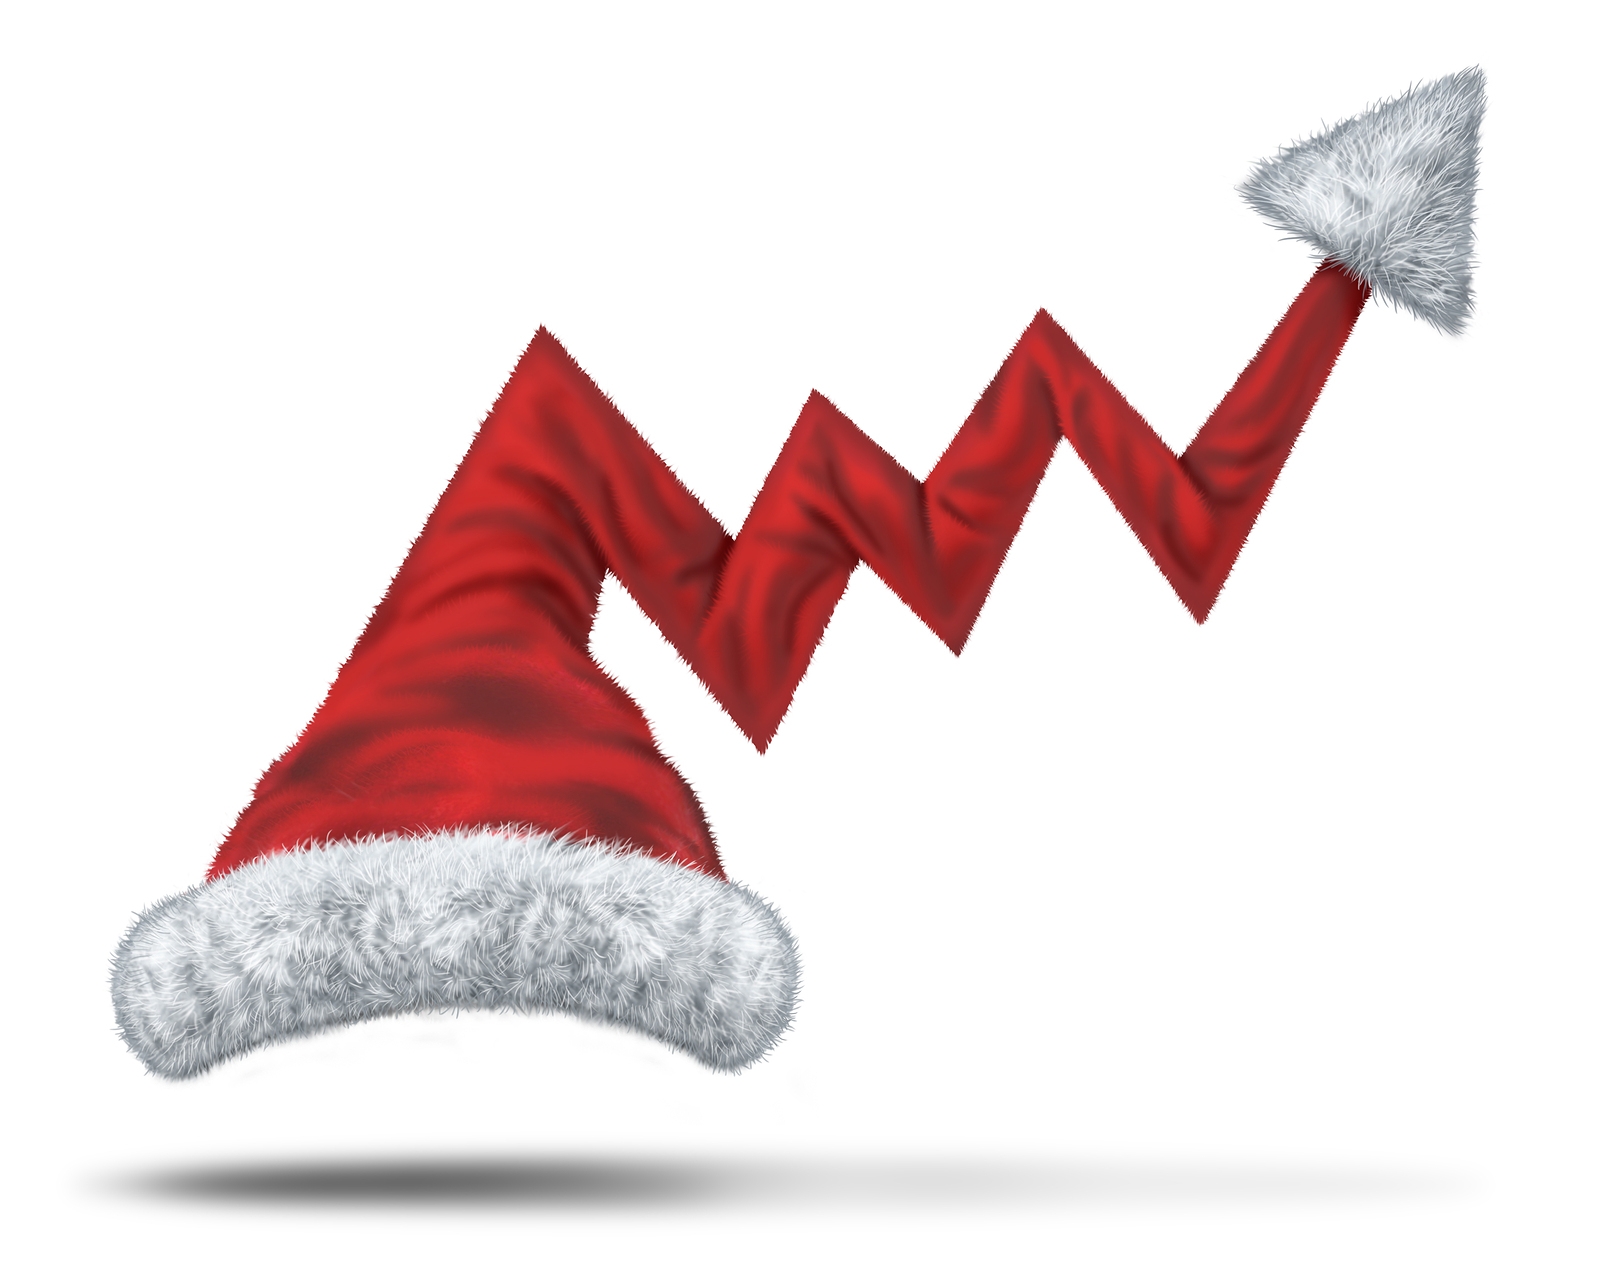 How did HGEM clients fare over the busy Christmas period?